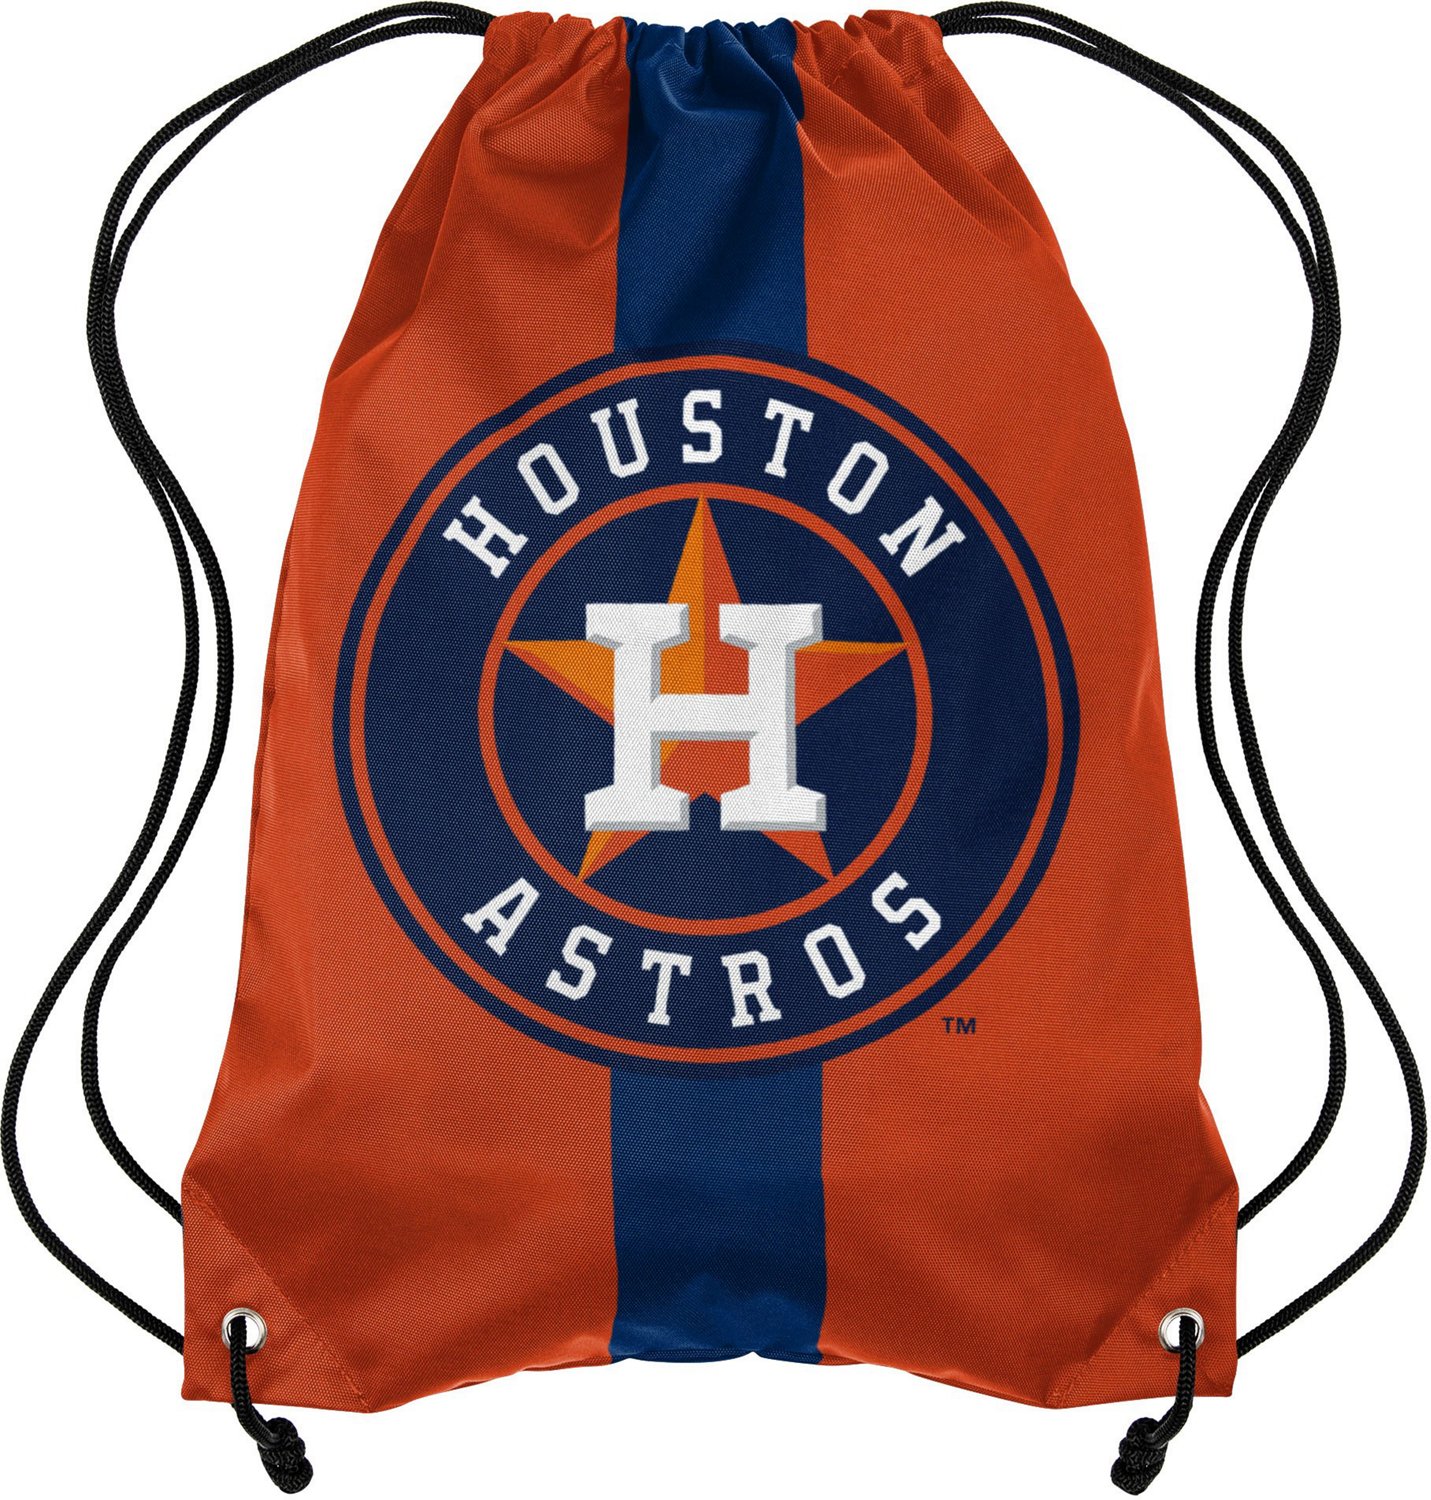 Astros Drawstring Bag /with Zipper Pouch